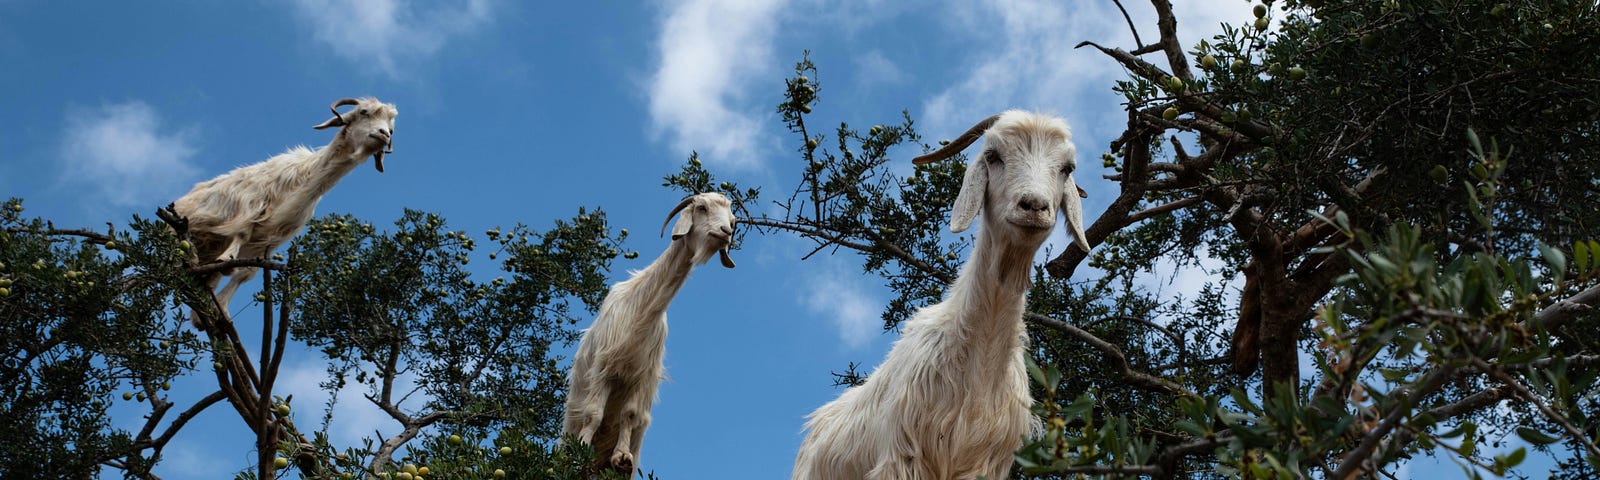 The Goat Squad posing for a photo to go along with their new record album.